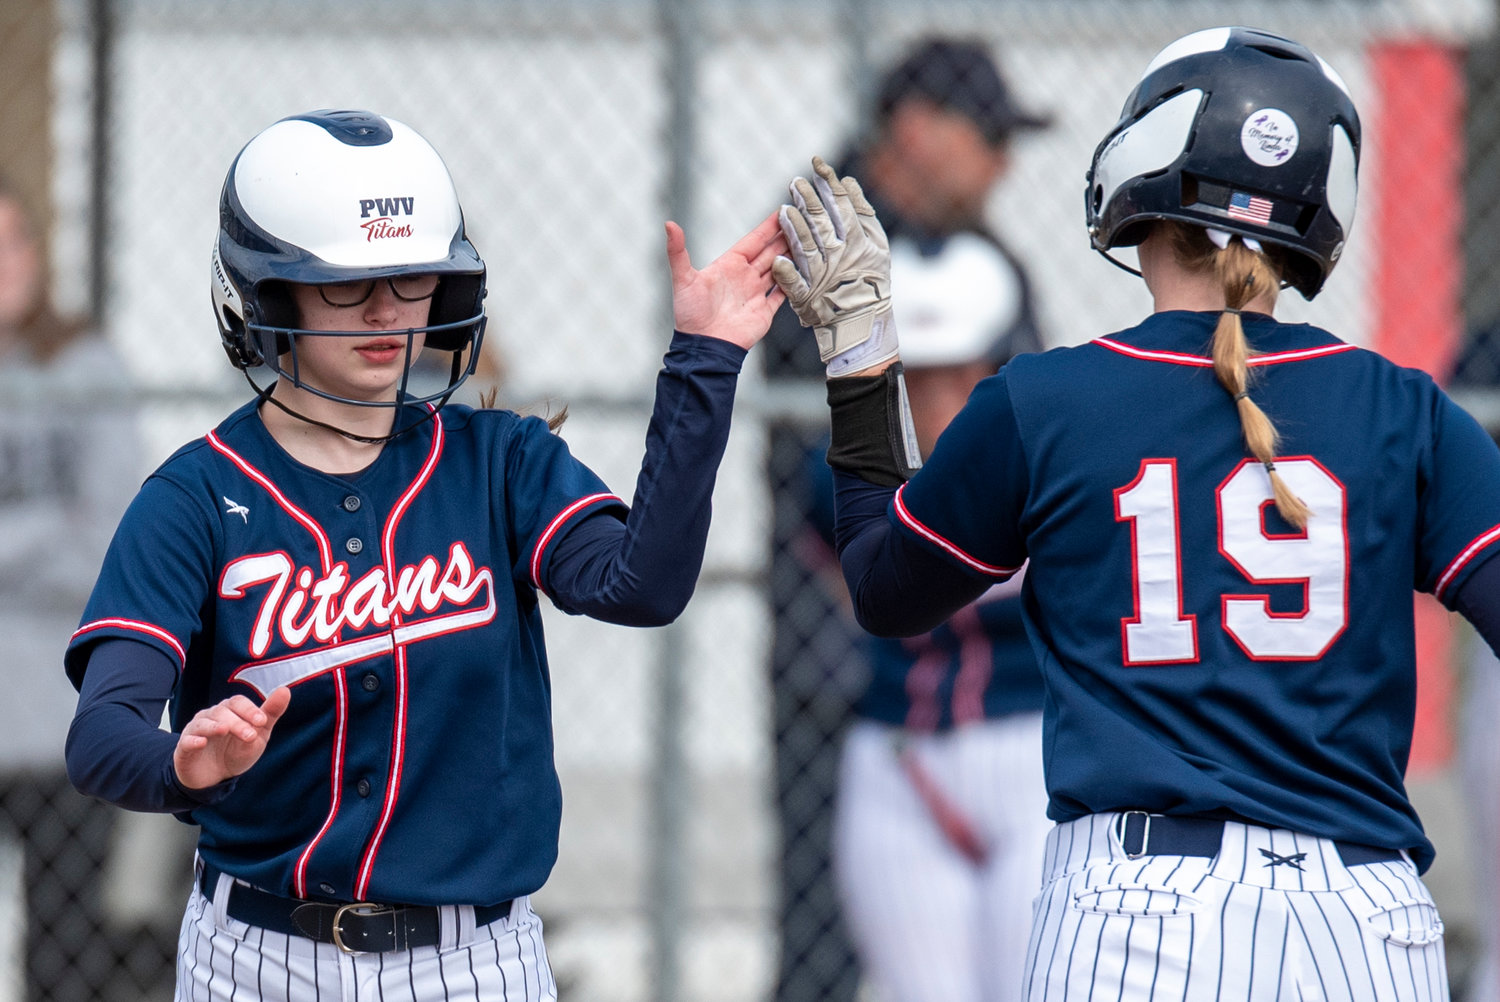 PWV's Lauren Emery, left, and Olivia Matlock (19) high-five as Emery pinch-runs for Matlock during a home game against Forks on April 1.